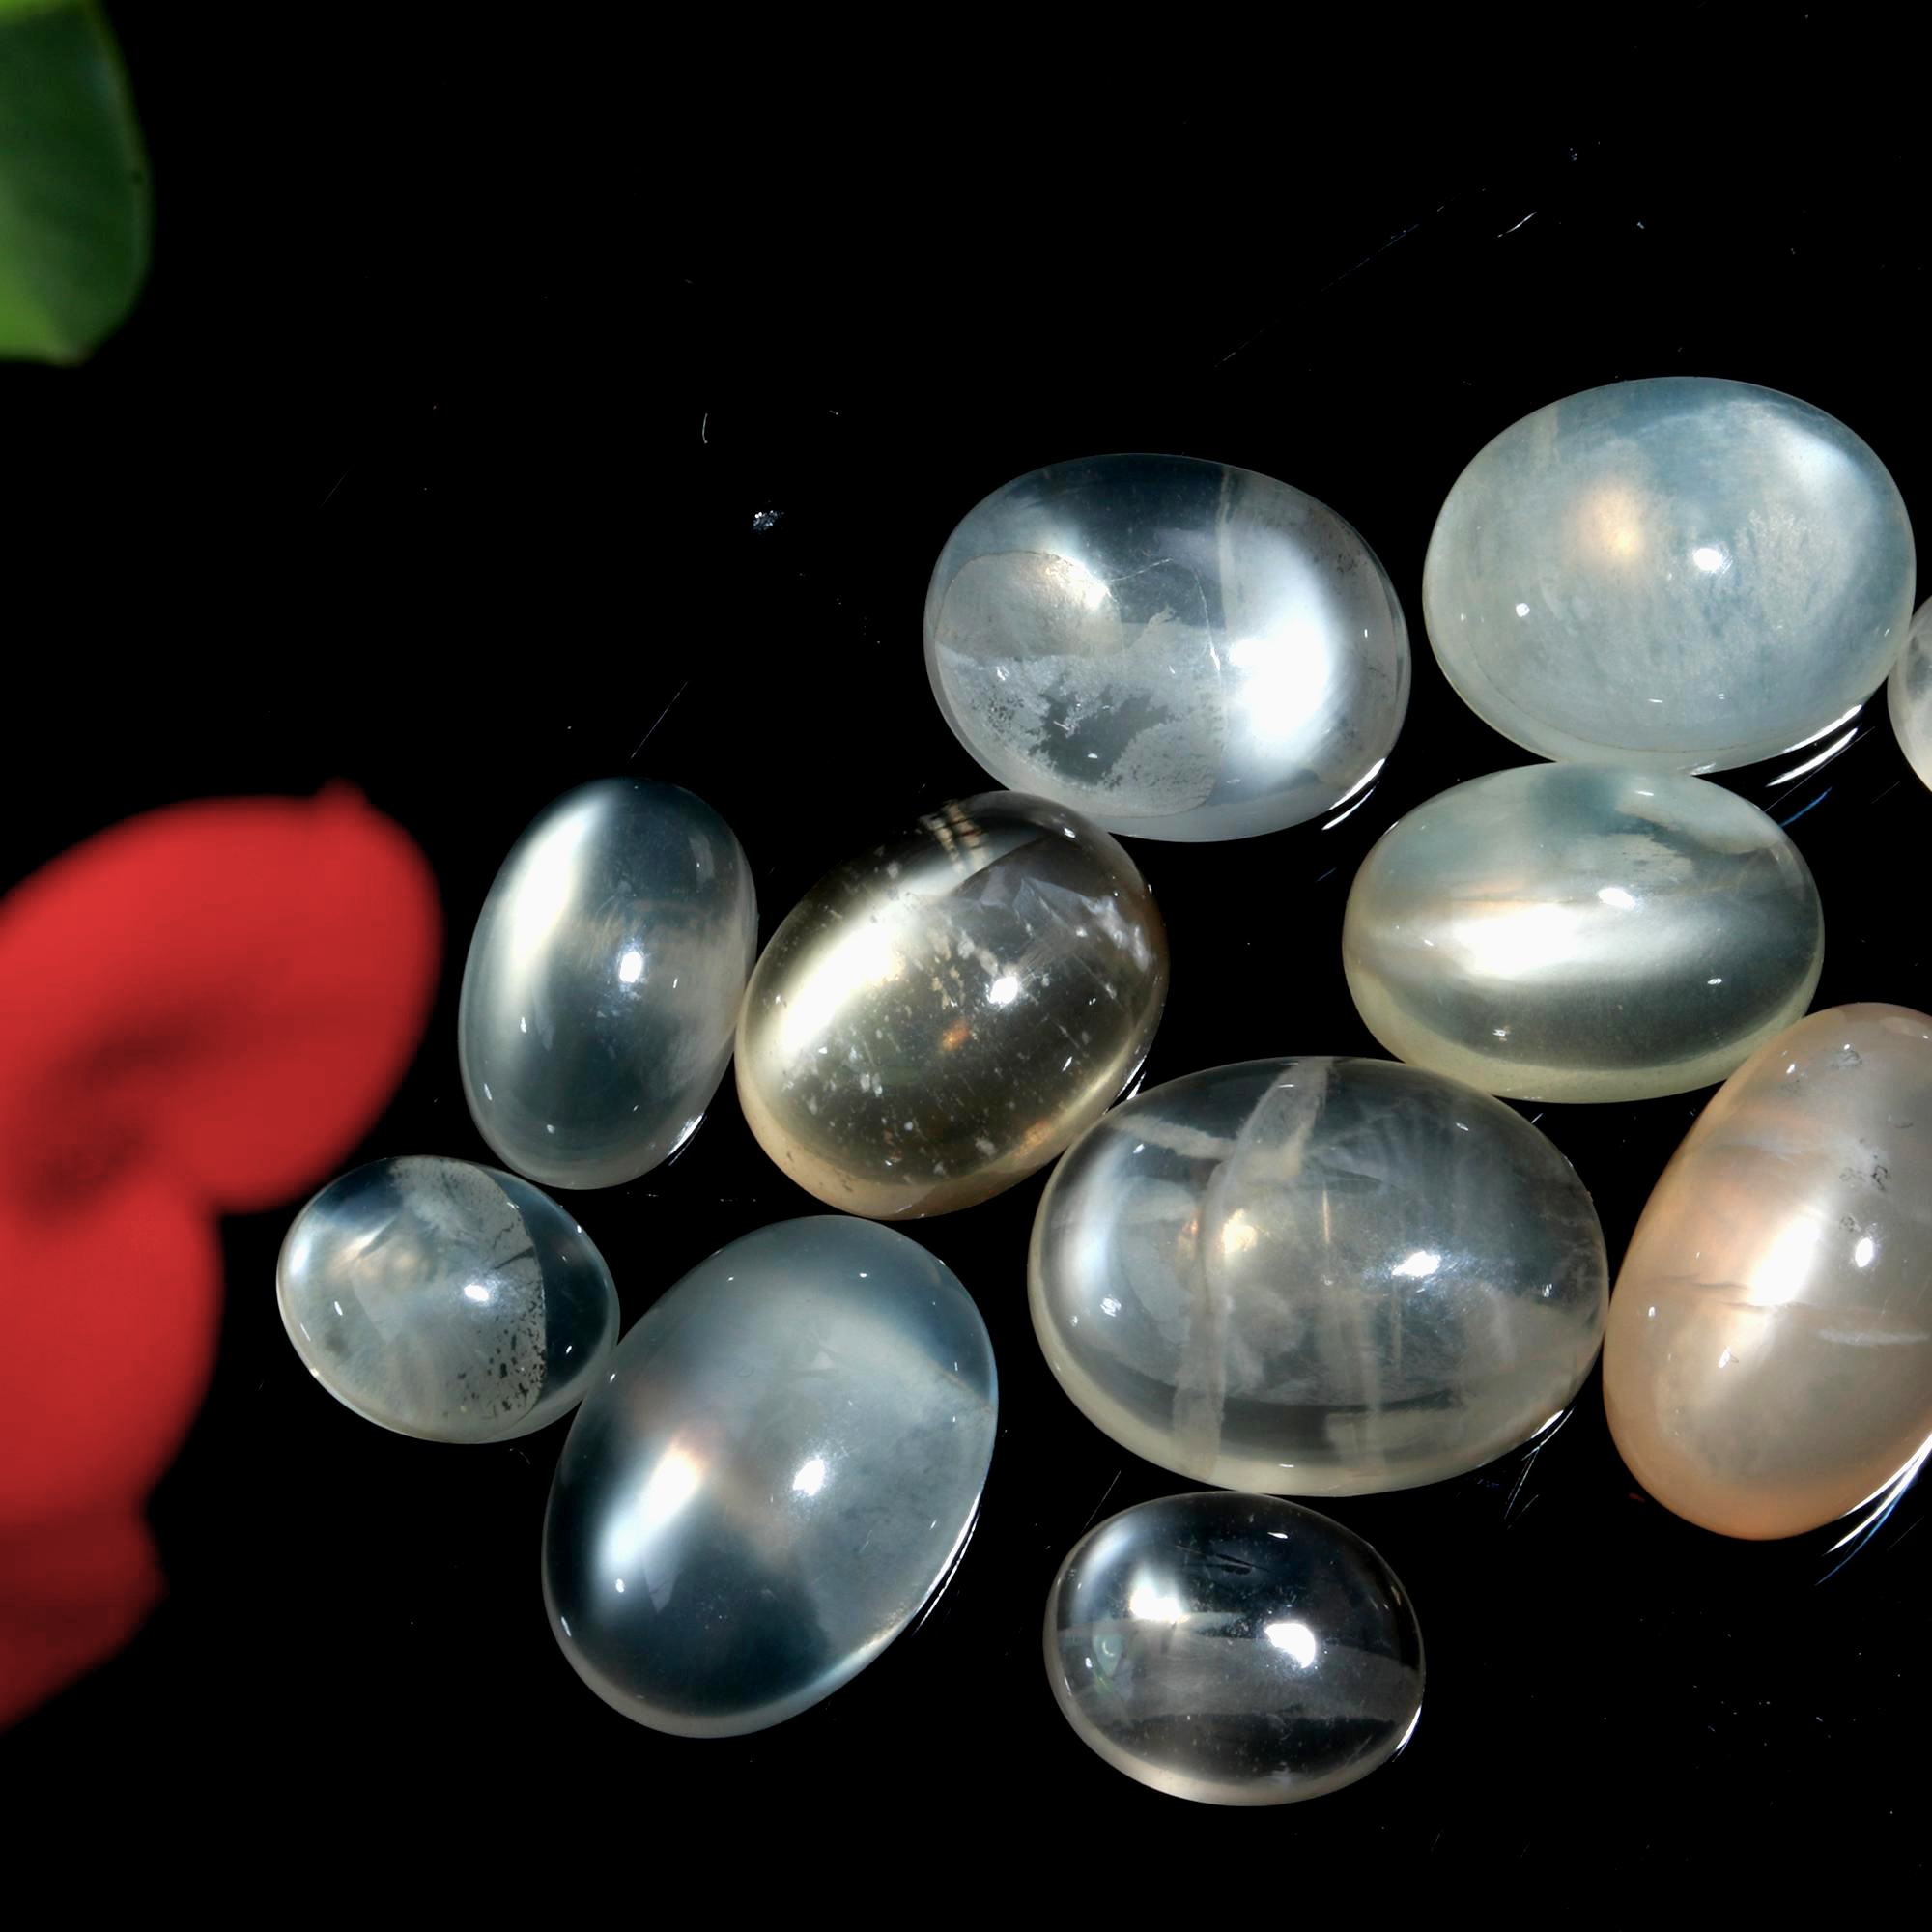 11 Pcs. 50Cts. Natural White Rainbow Moonstone polished Mix Cabochon Wholesale Loose Lot Size 15x9 9x7mm Gemstone for jewelry